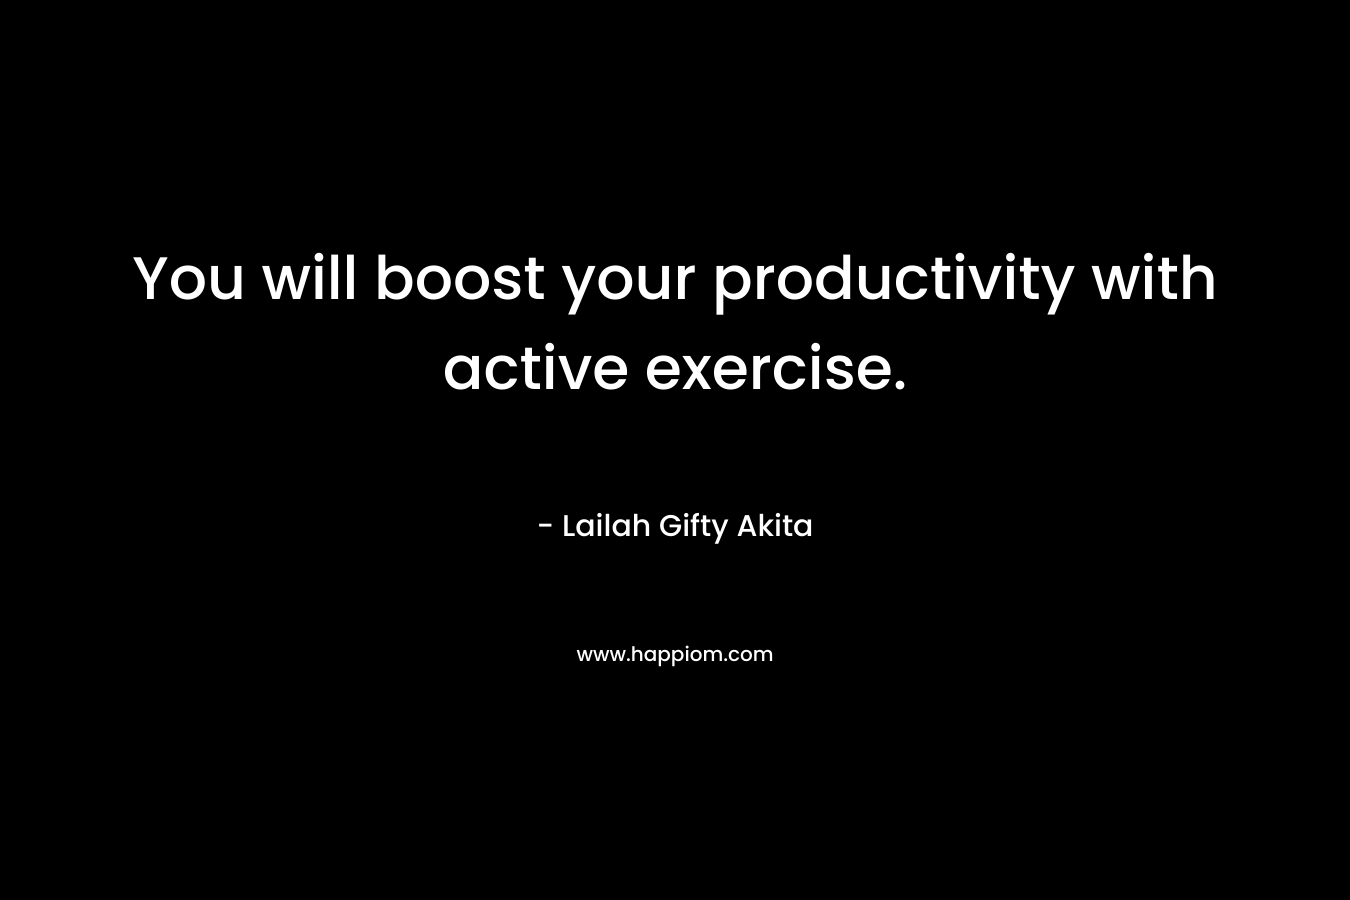 You will boost your productivity with active exercise.